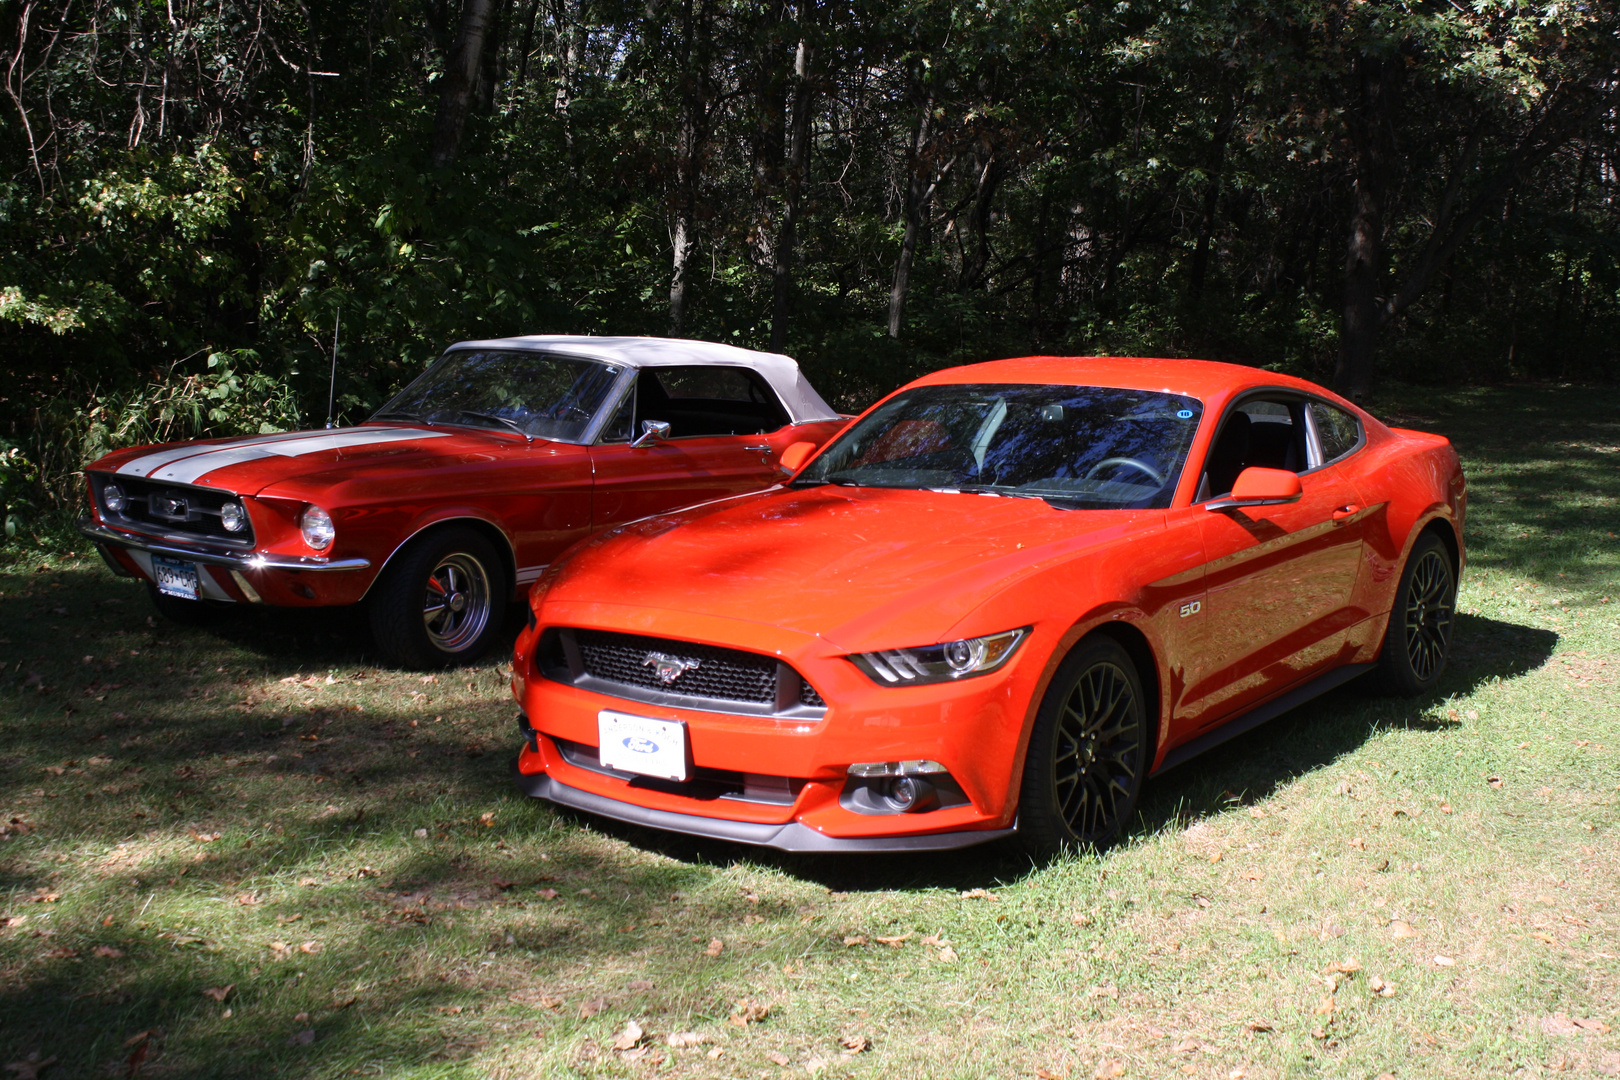 I love my old Mustang and I love my new Mustang.